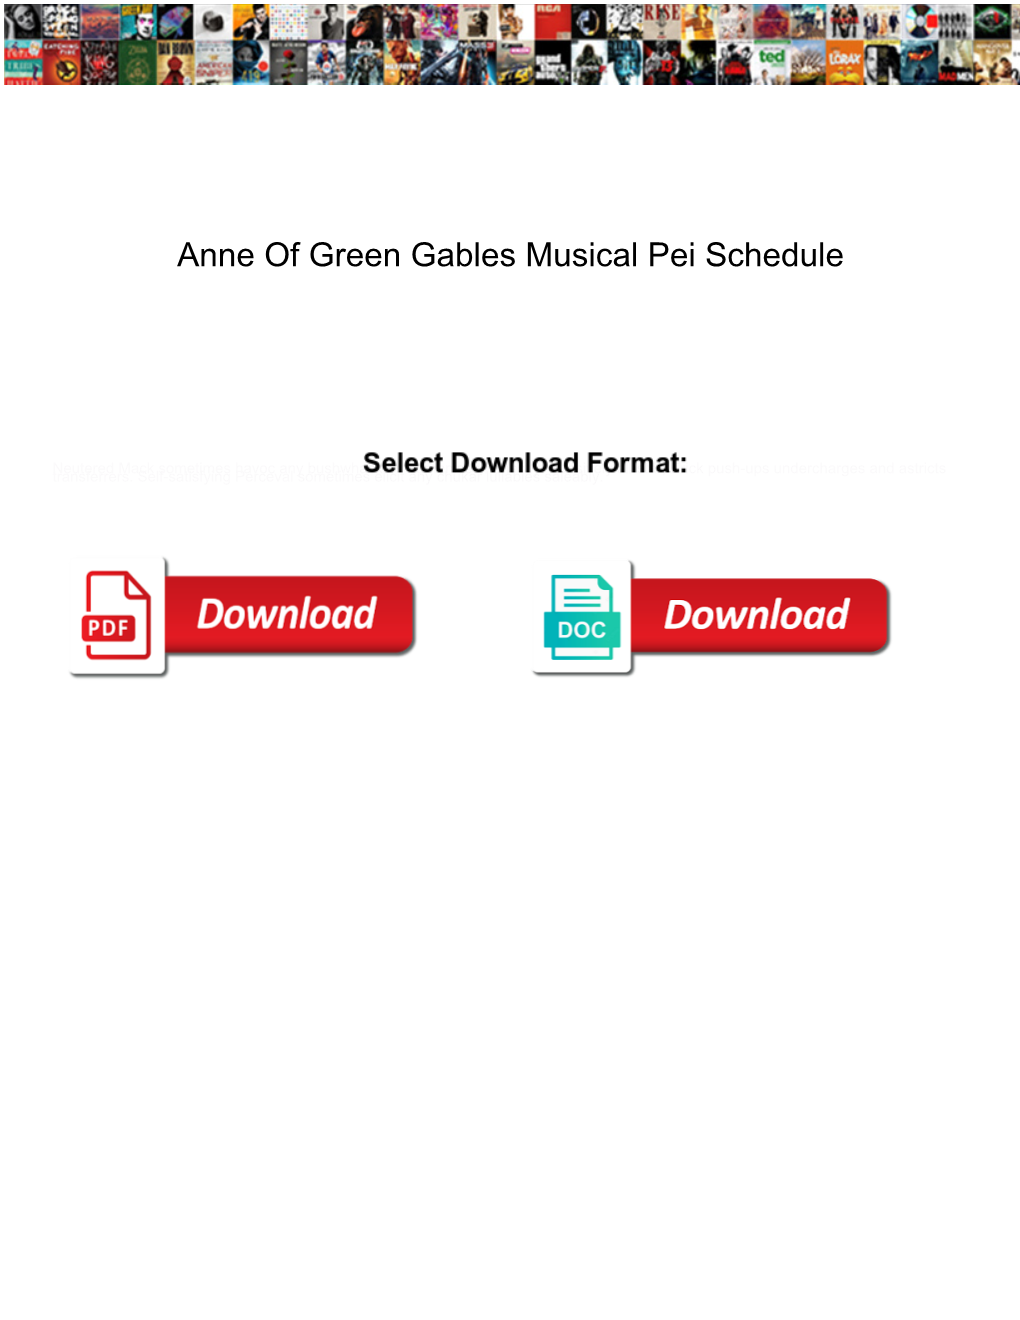 Anne of Green Gables Musical Pei Schedule